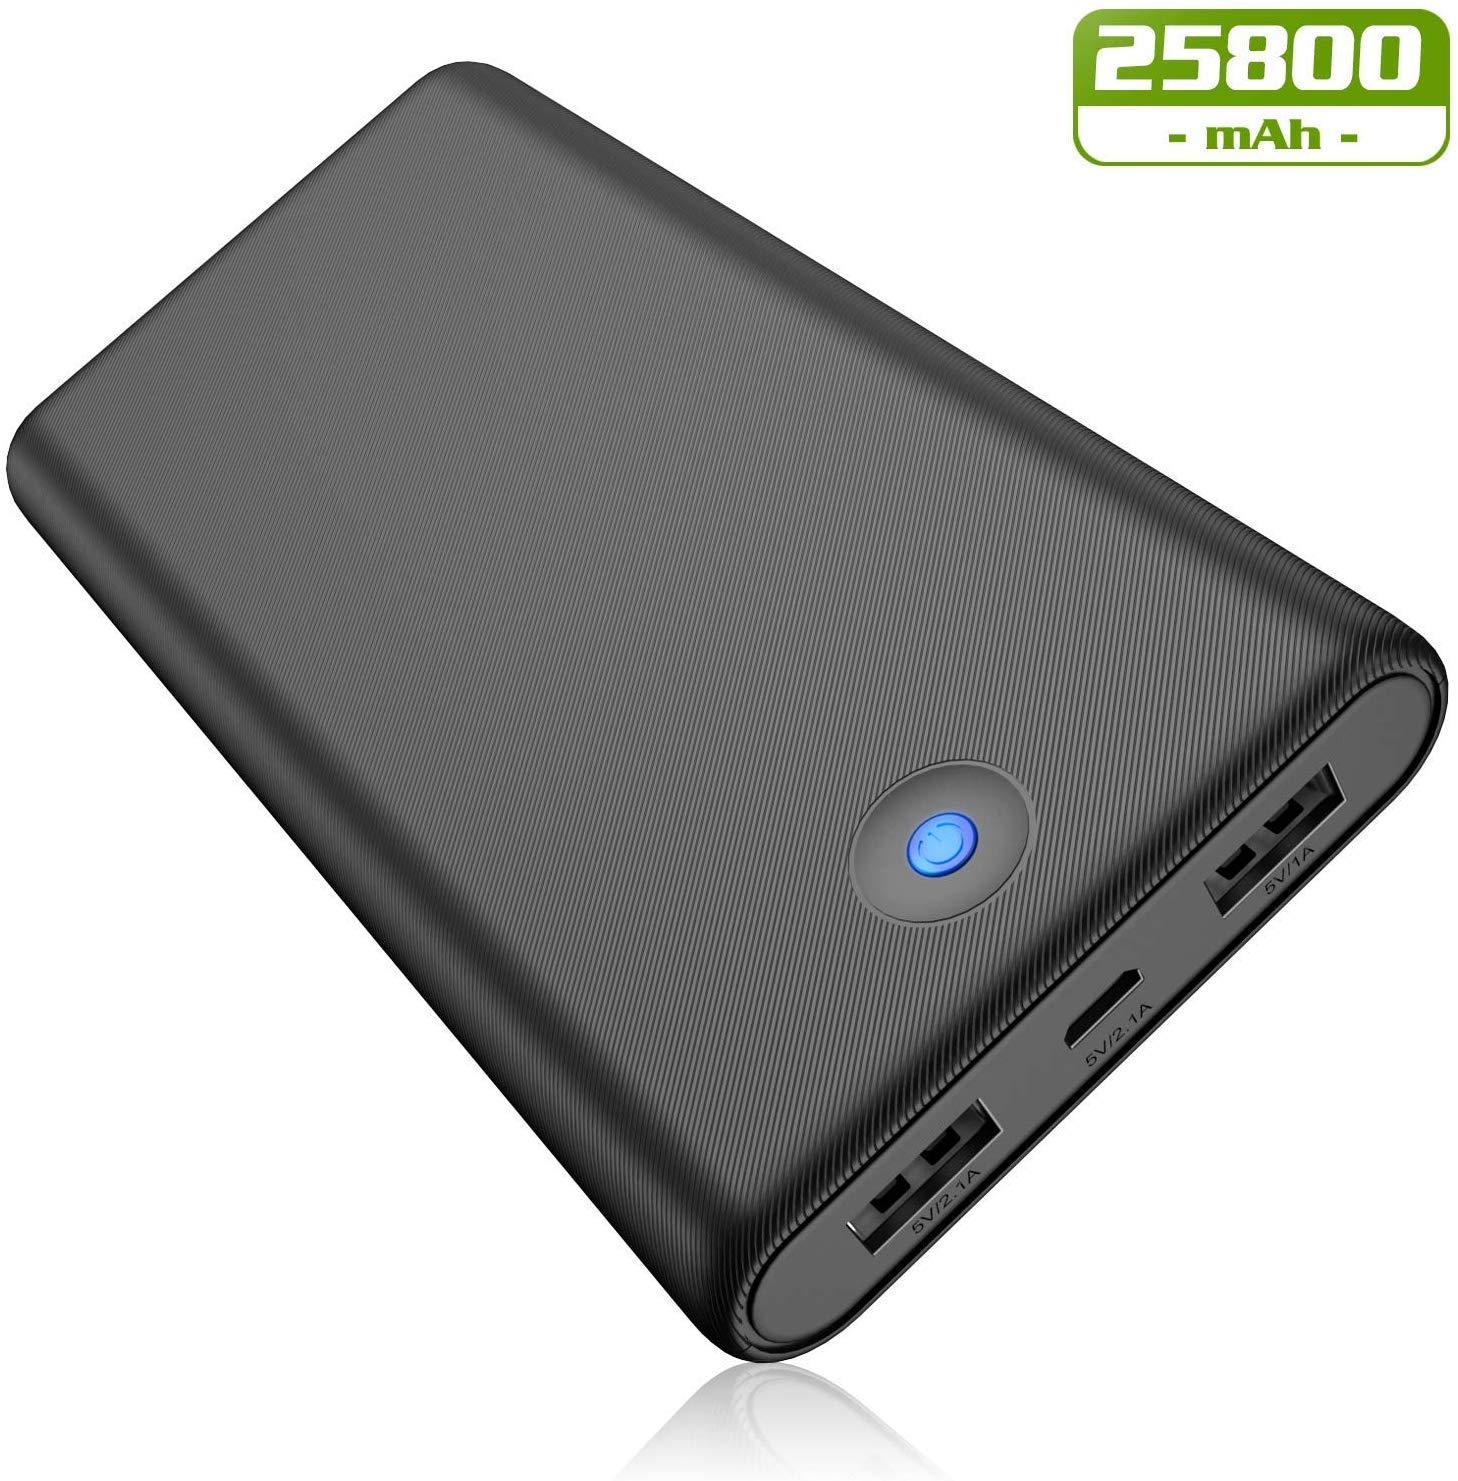 Feob Portable Charger Power Banks for Mobile Phones